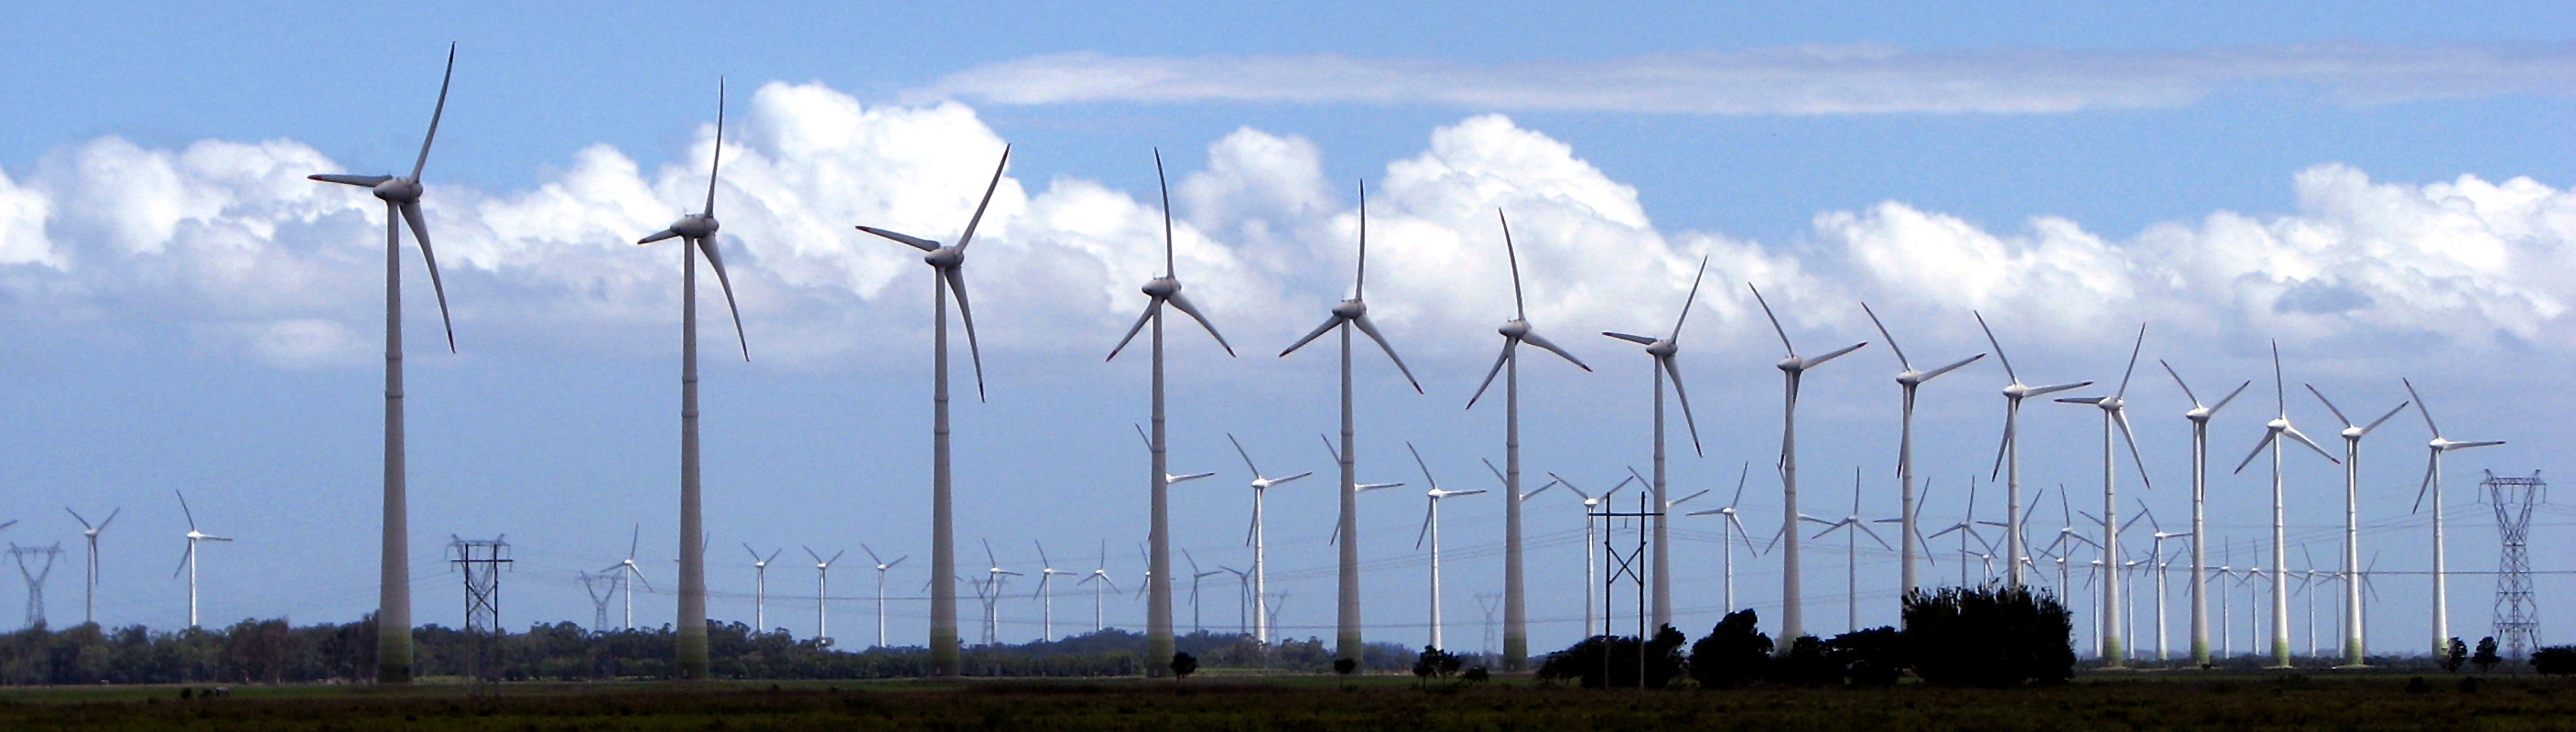 Wind farm in Osório, in the South of Brazil